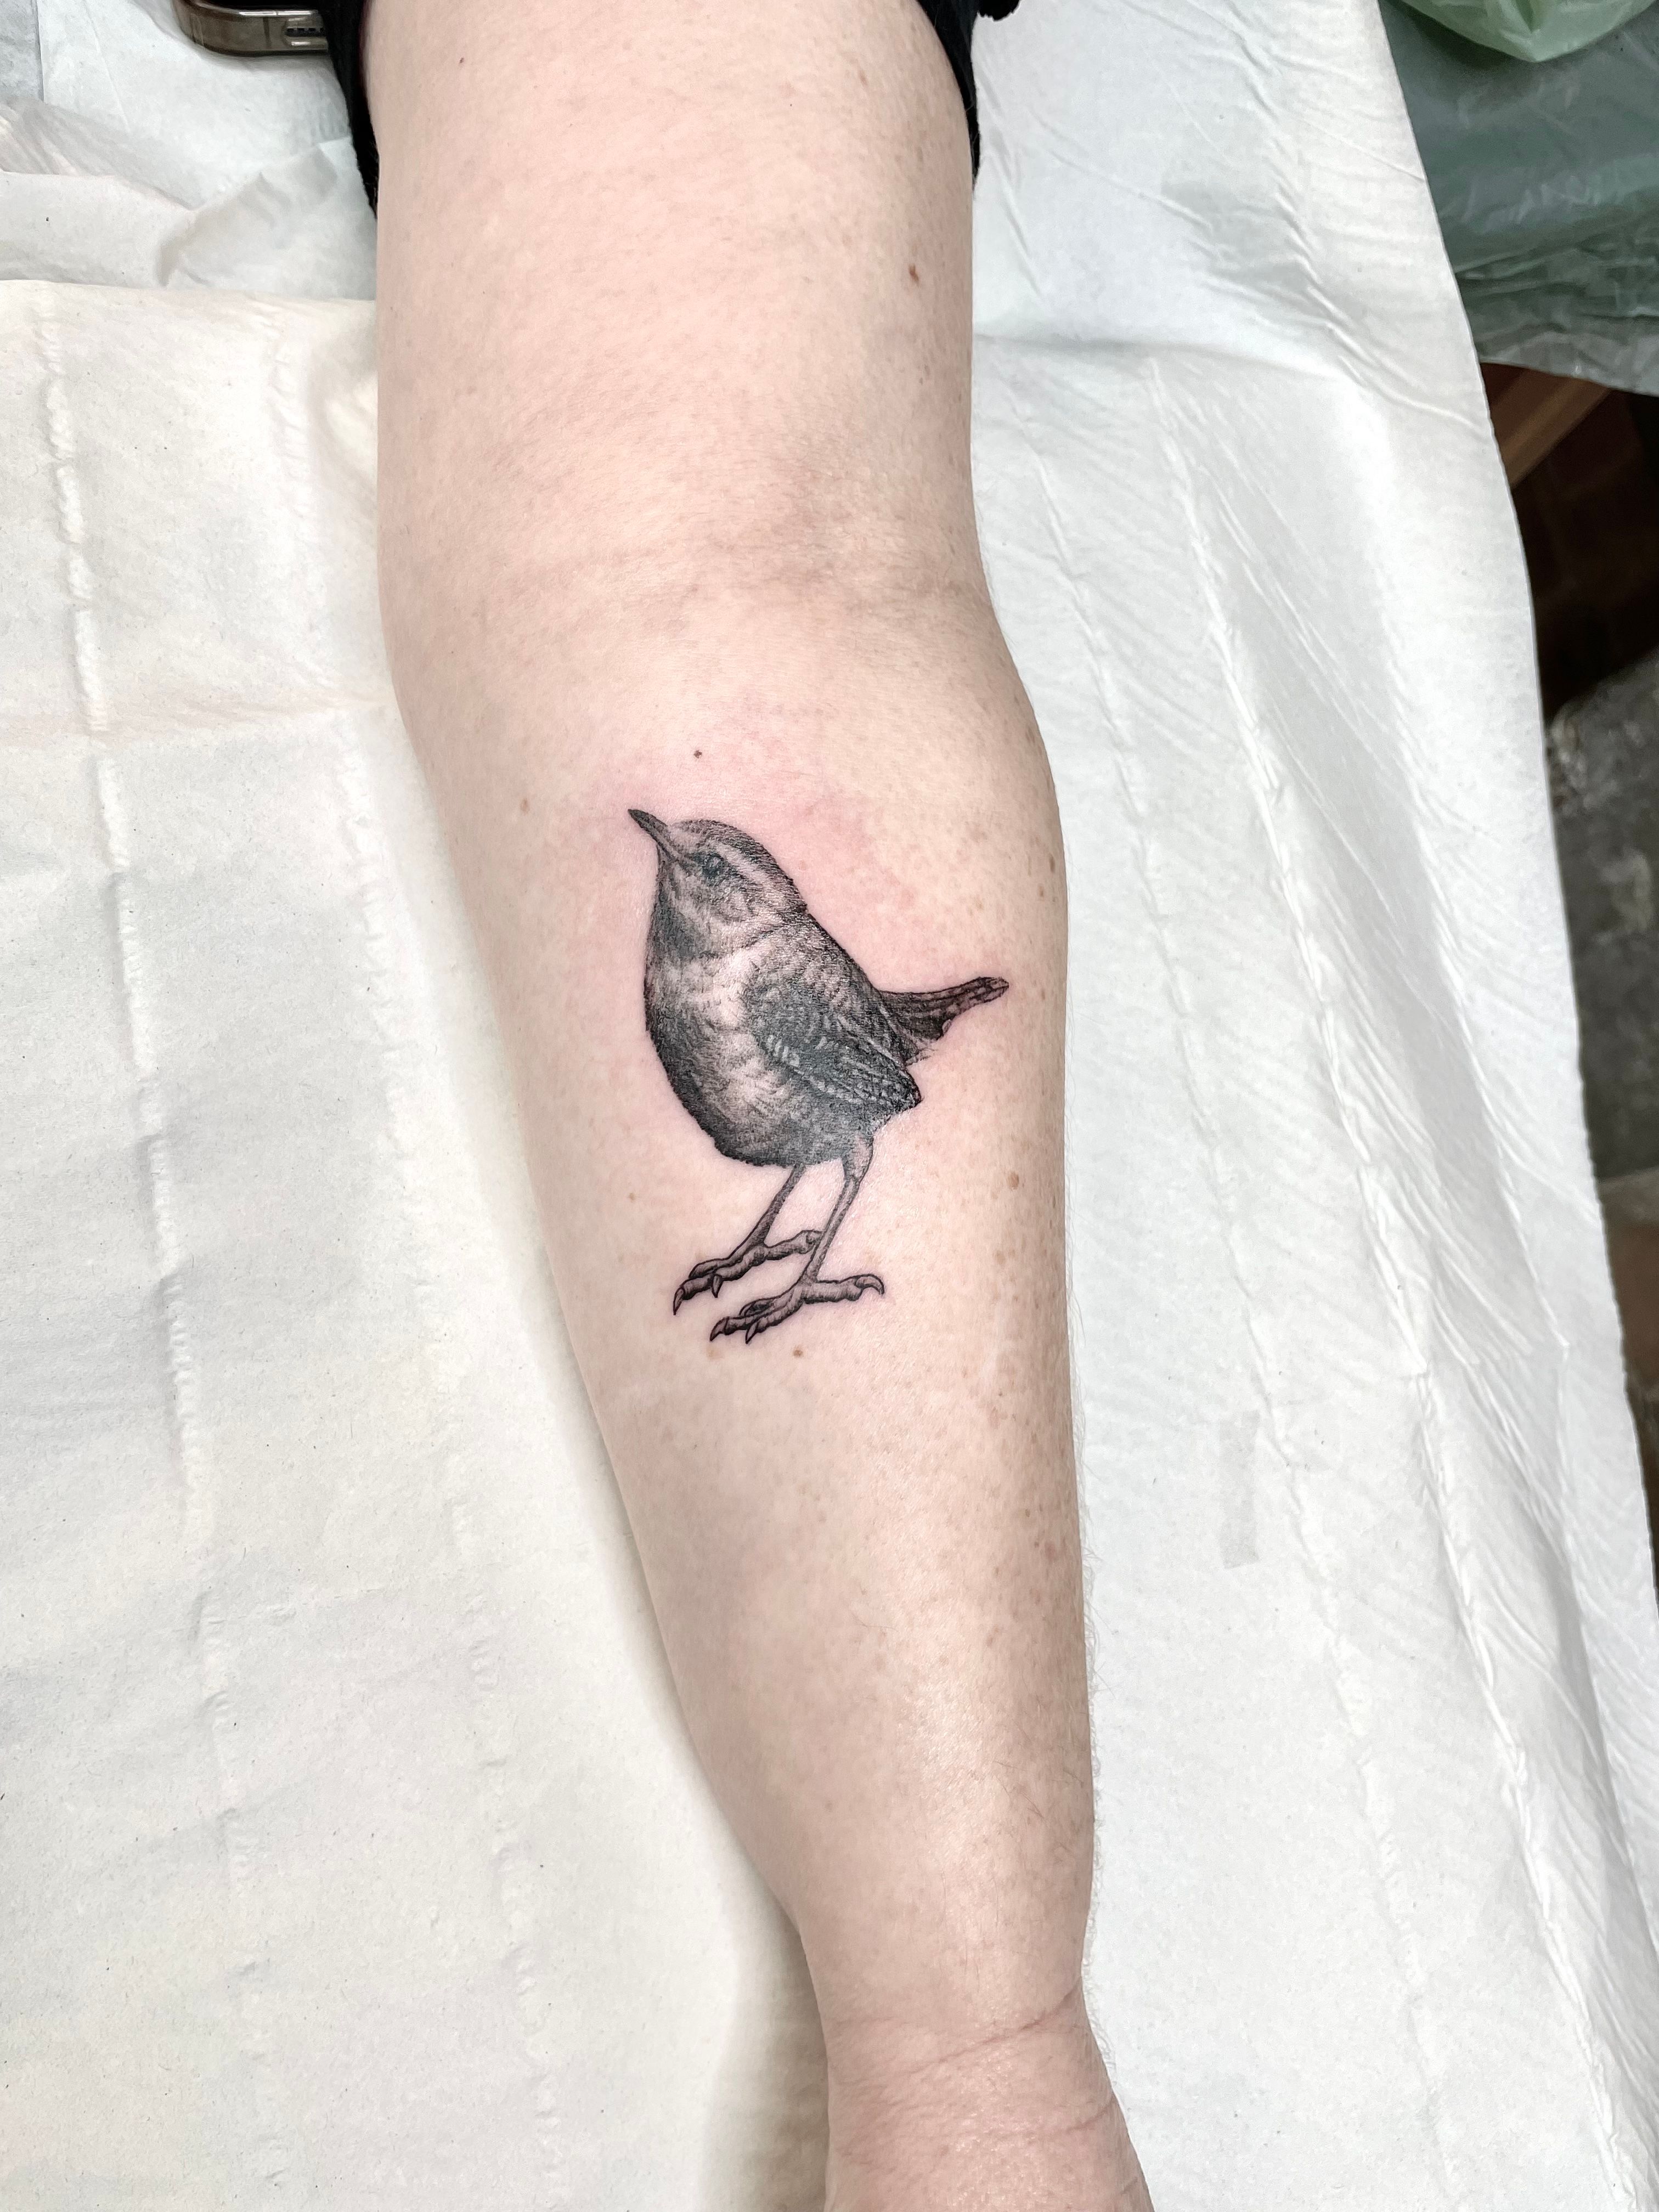 101 Amazing Crow Tattoo Designs You Need To See! | Crow tattoo design, Crow  tattoo, Black tattoos